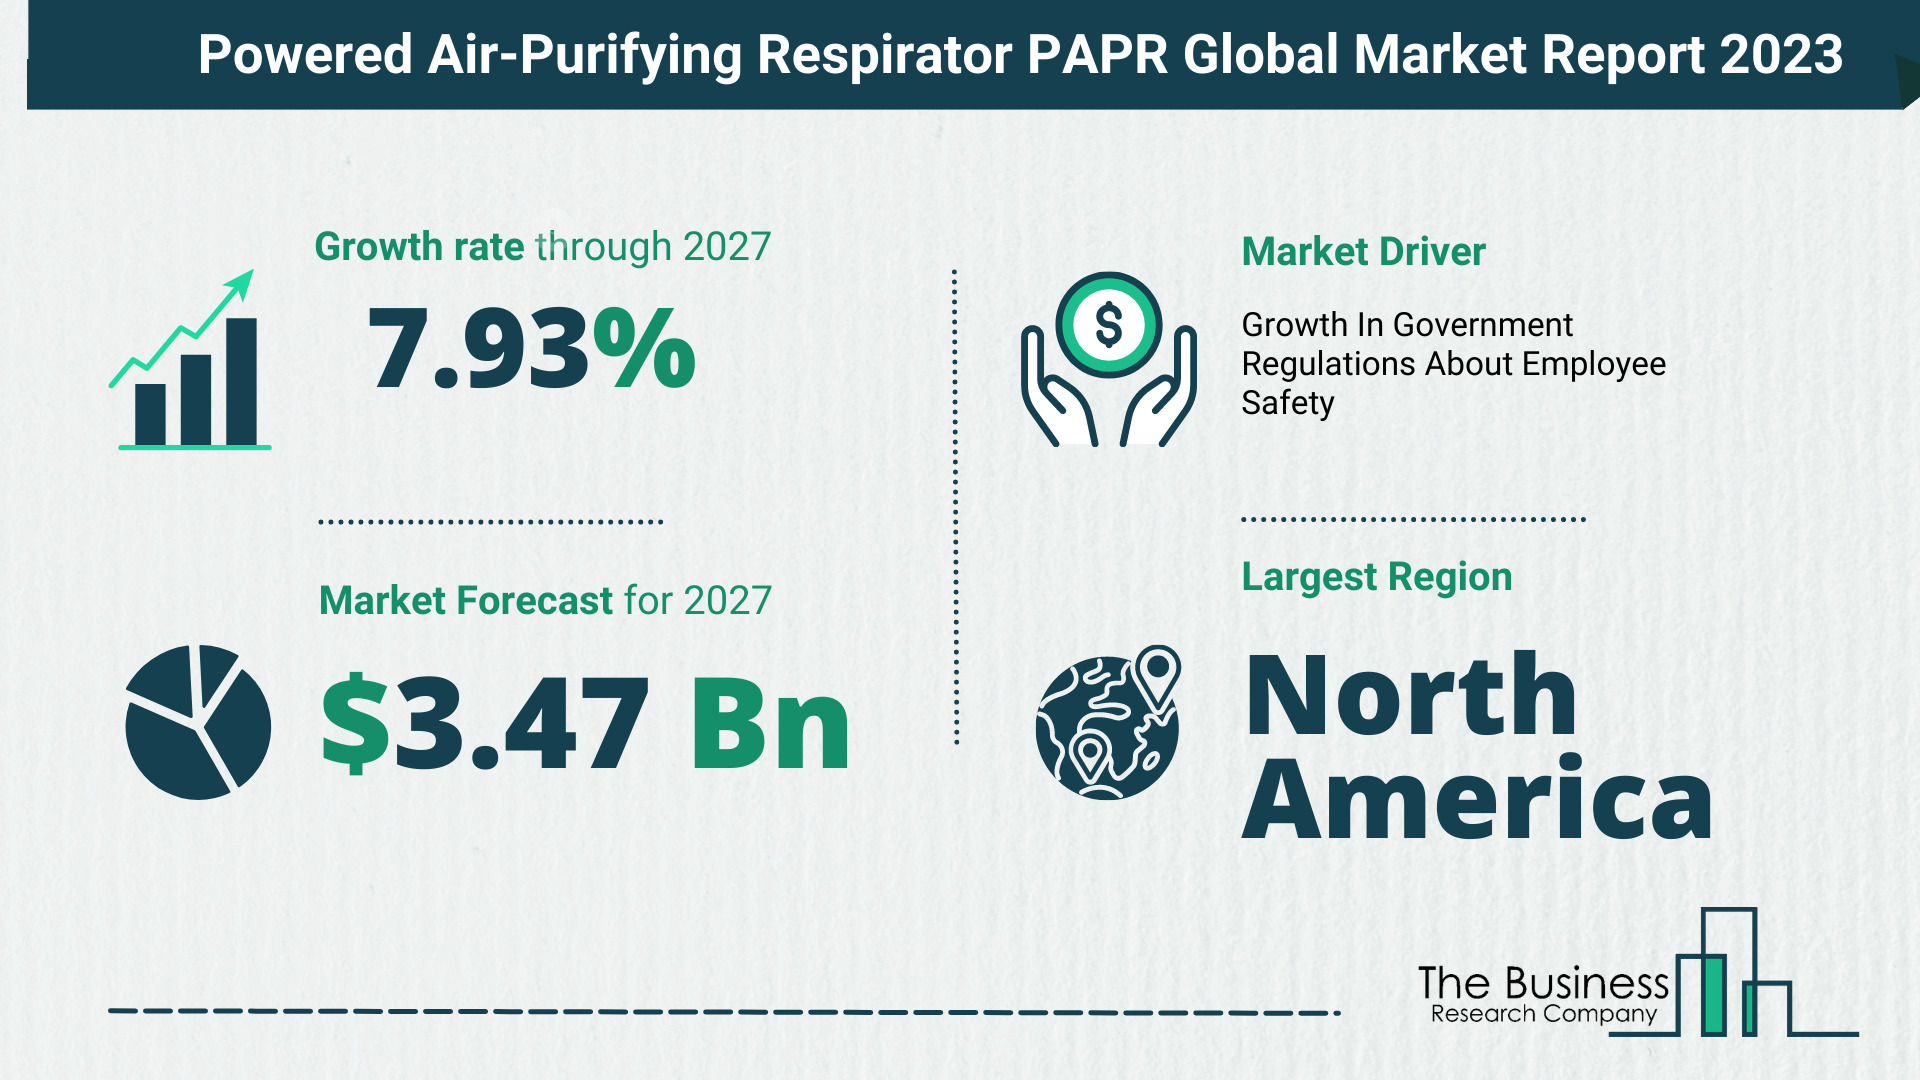 What Will The Powered Air-Purifying Respirator PAPR Market Look Like In 2023?